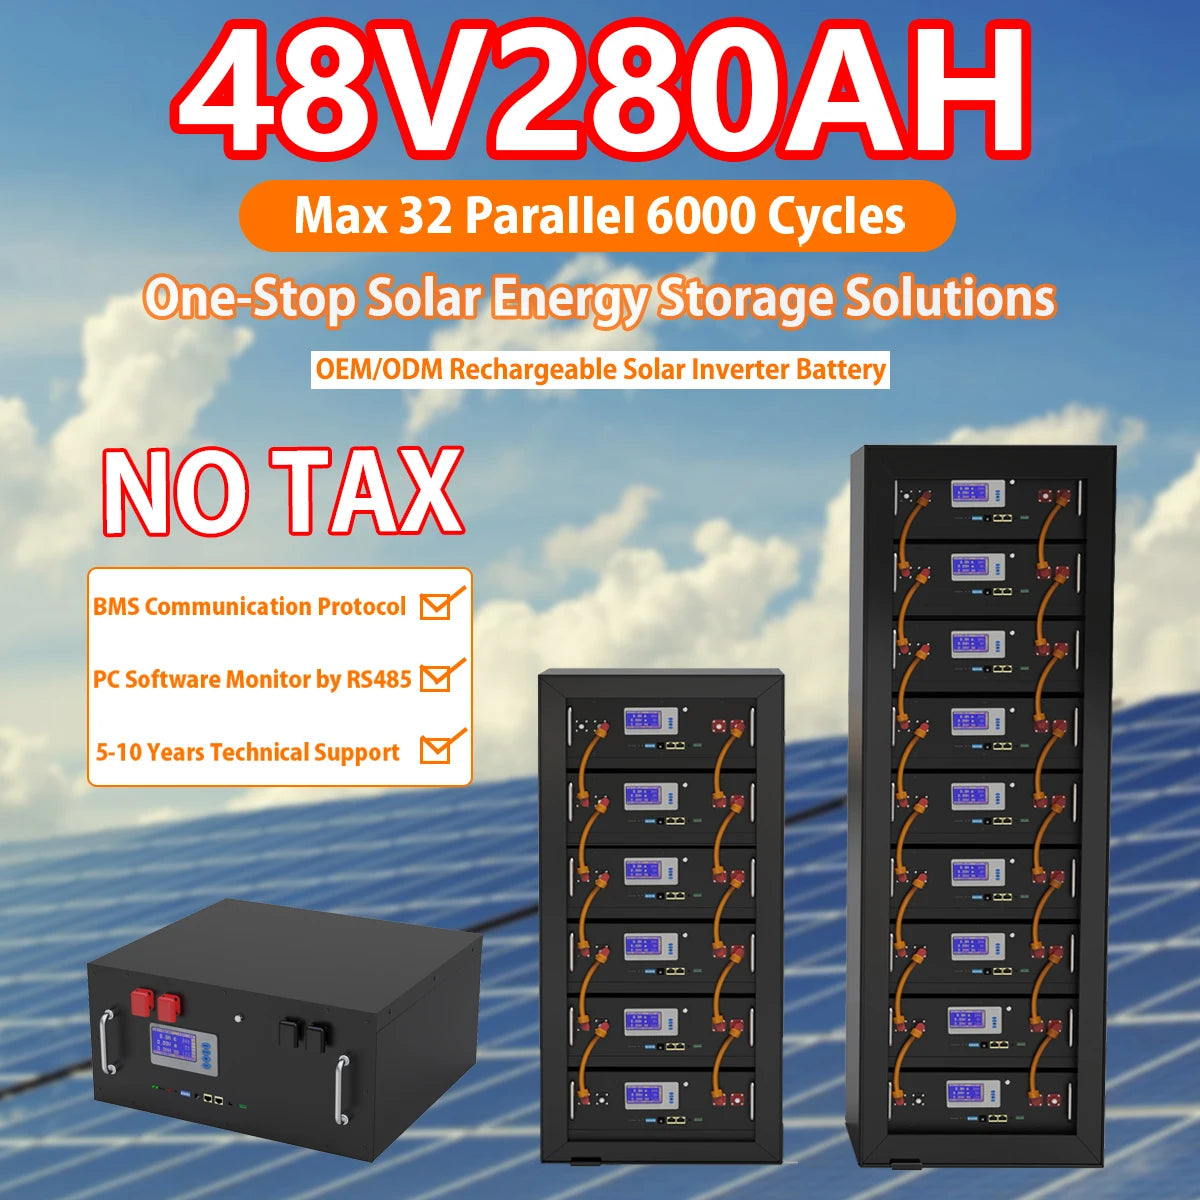 New 48 280Ah LiFePO4 14Kwh Battery, Reliable energy storage with 6000 cycles, parallel connections, and advanced monitoring features.